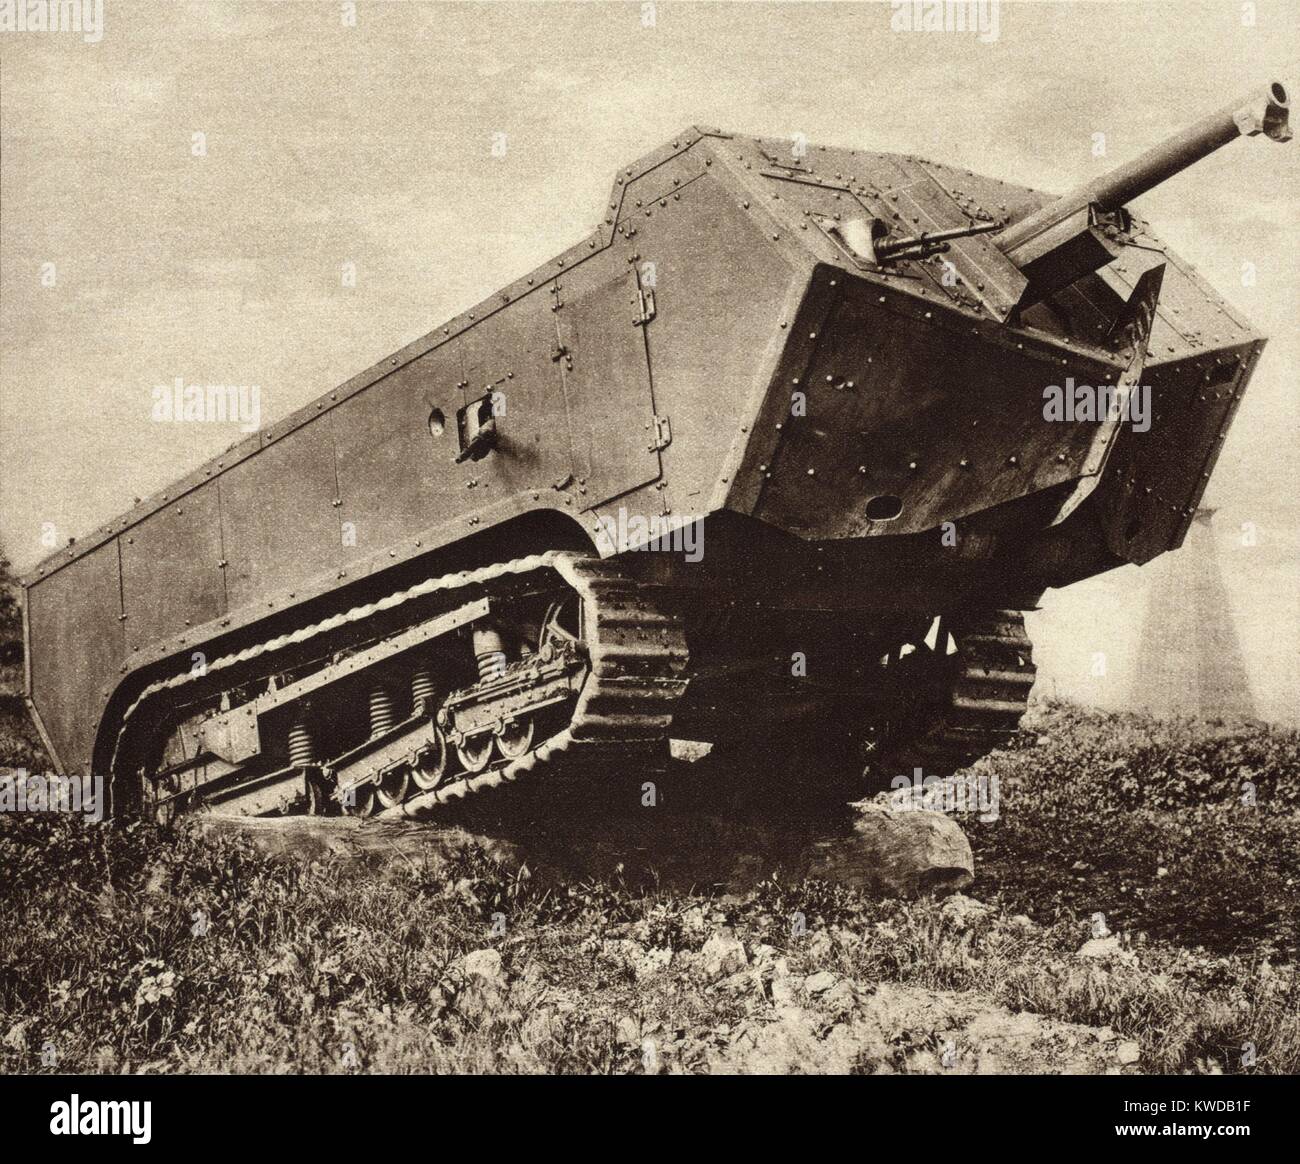 World War 1 Tanks. French Saint-Chamond tank in the field. Powerfully armed, it was capable of crossing trenches, knocking down trees, and houses, and tearing wire entanglements. Its long nose tended to dig into the ground, and its short treads couldnt span trenches. Ca. 1917-18. (BSLOC 2013 1 160) Stock Photo